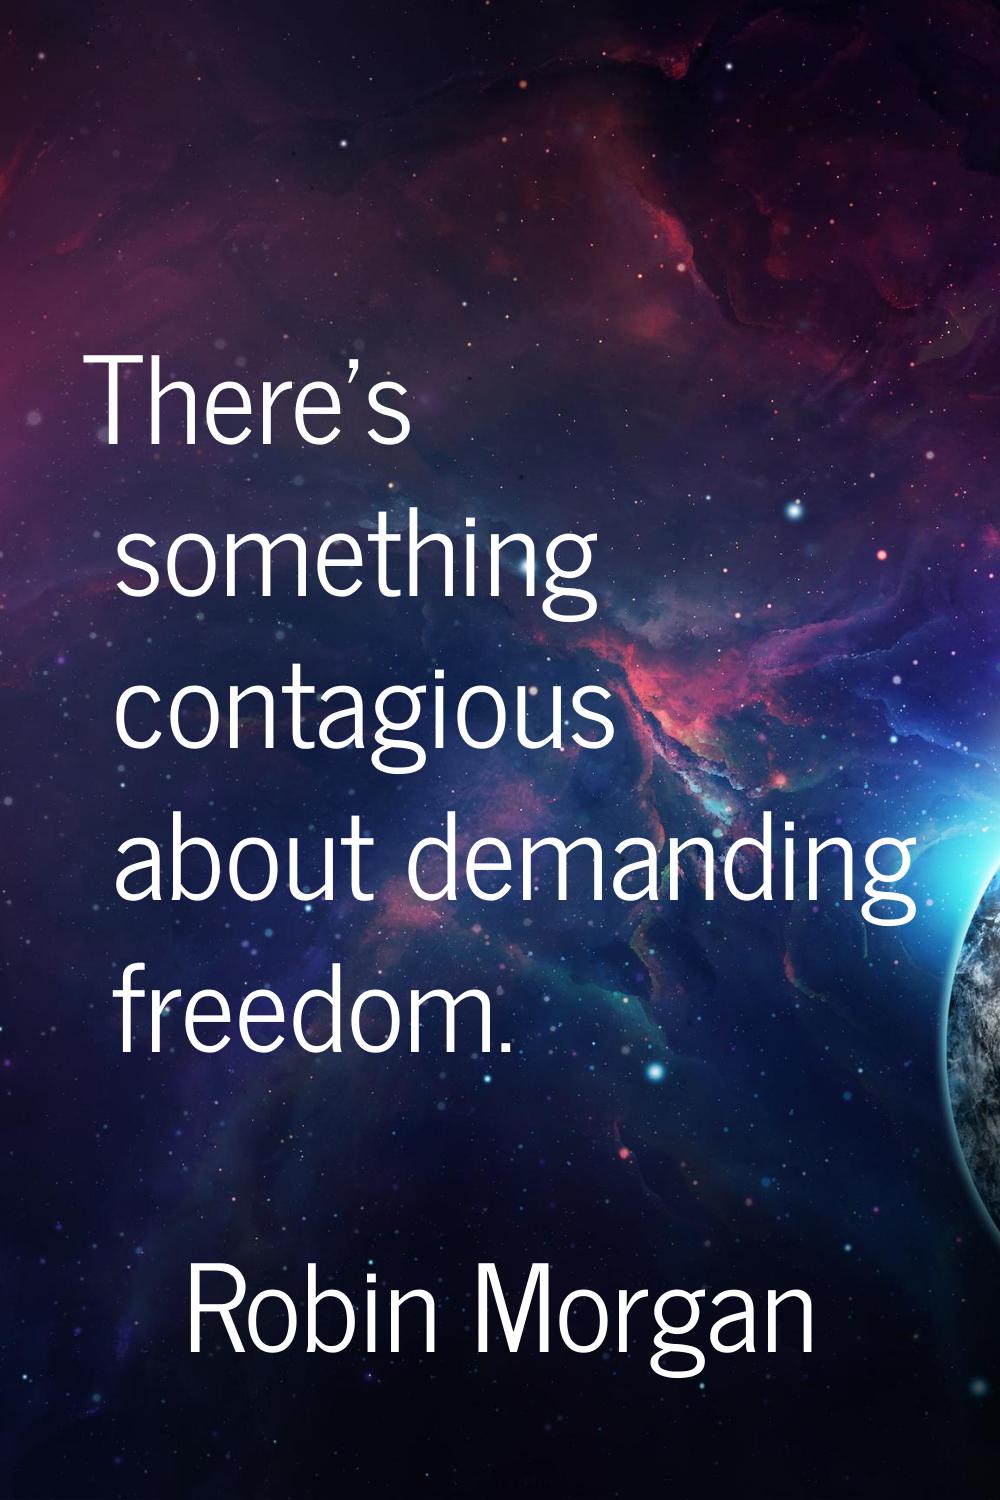 There's something contagious about demanding freedom.